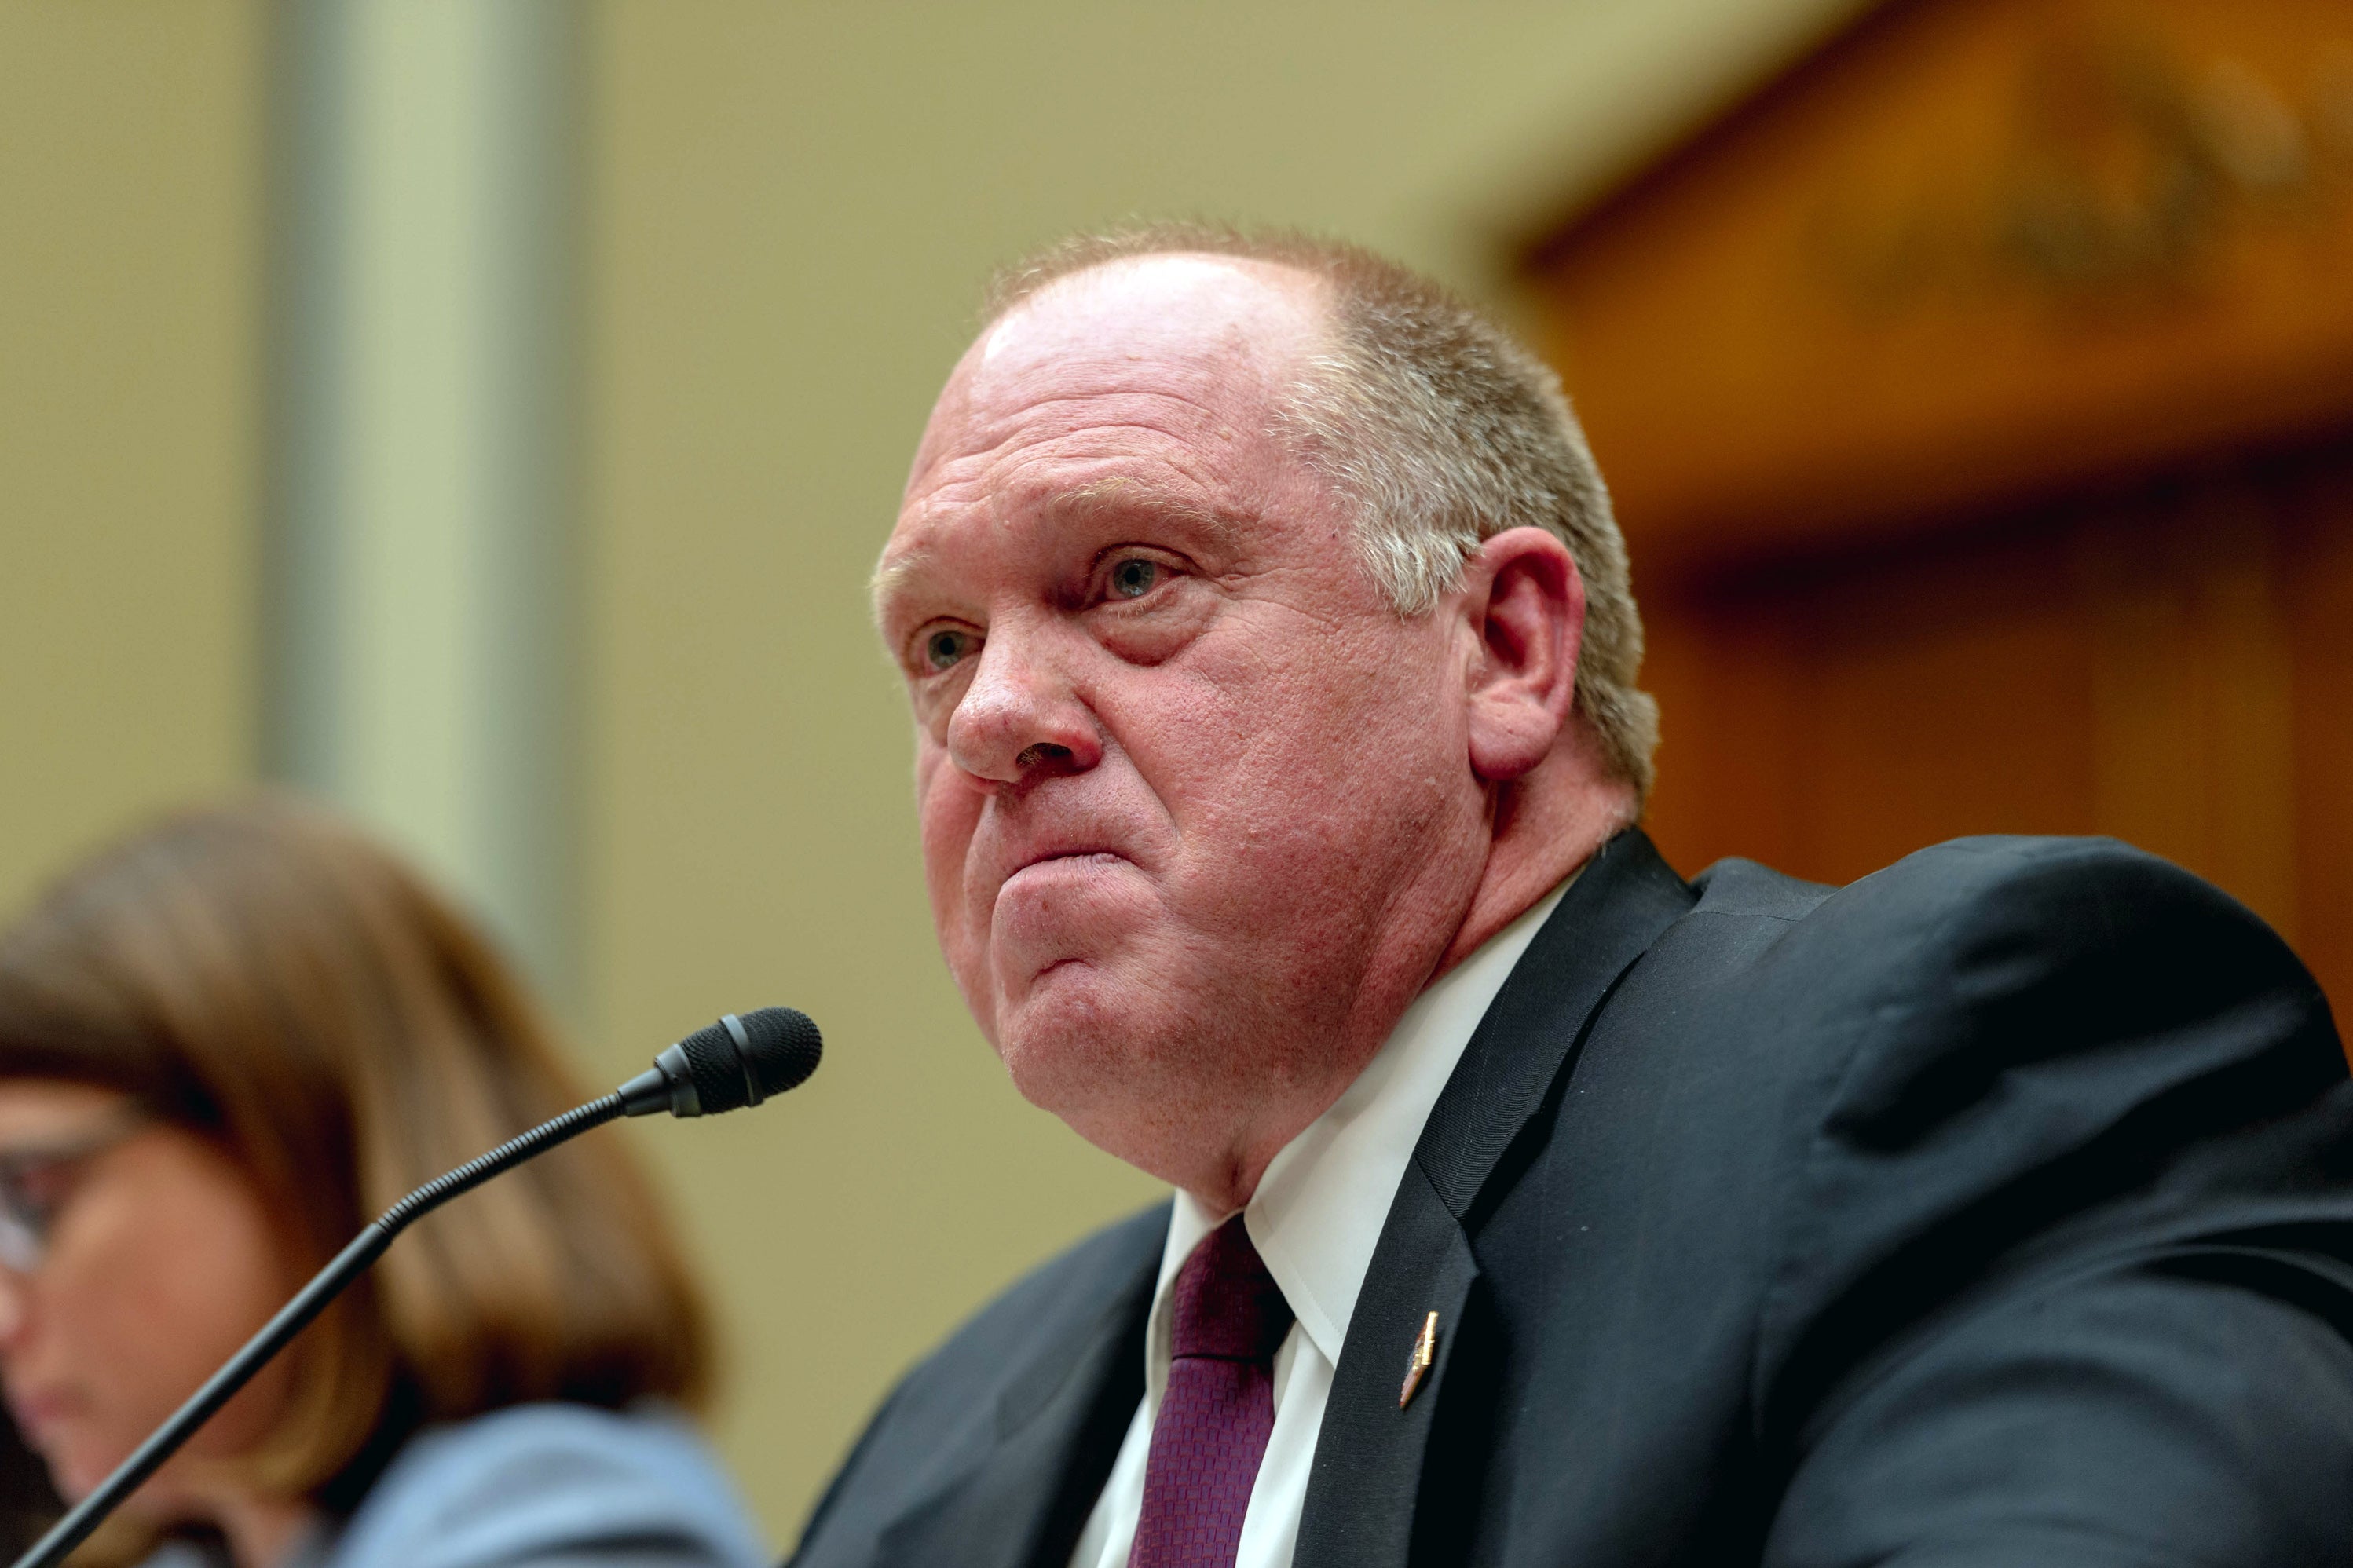 Thomas Homan at a microphone in a hearing room.